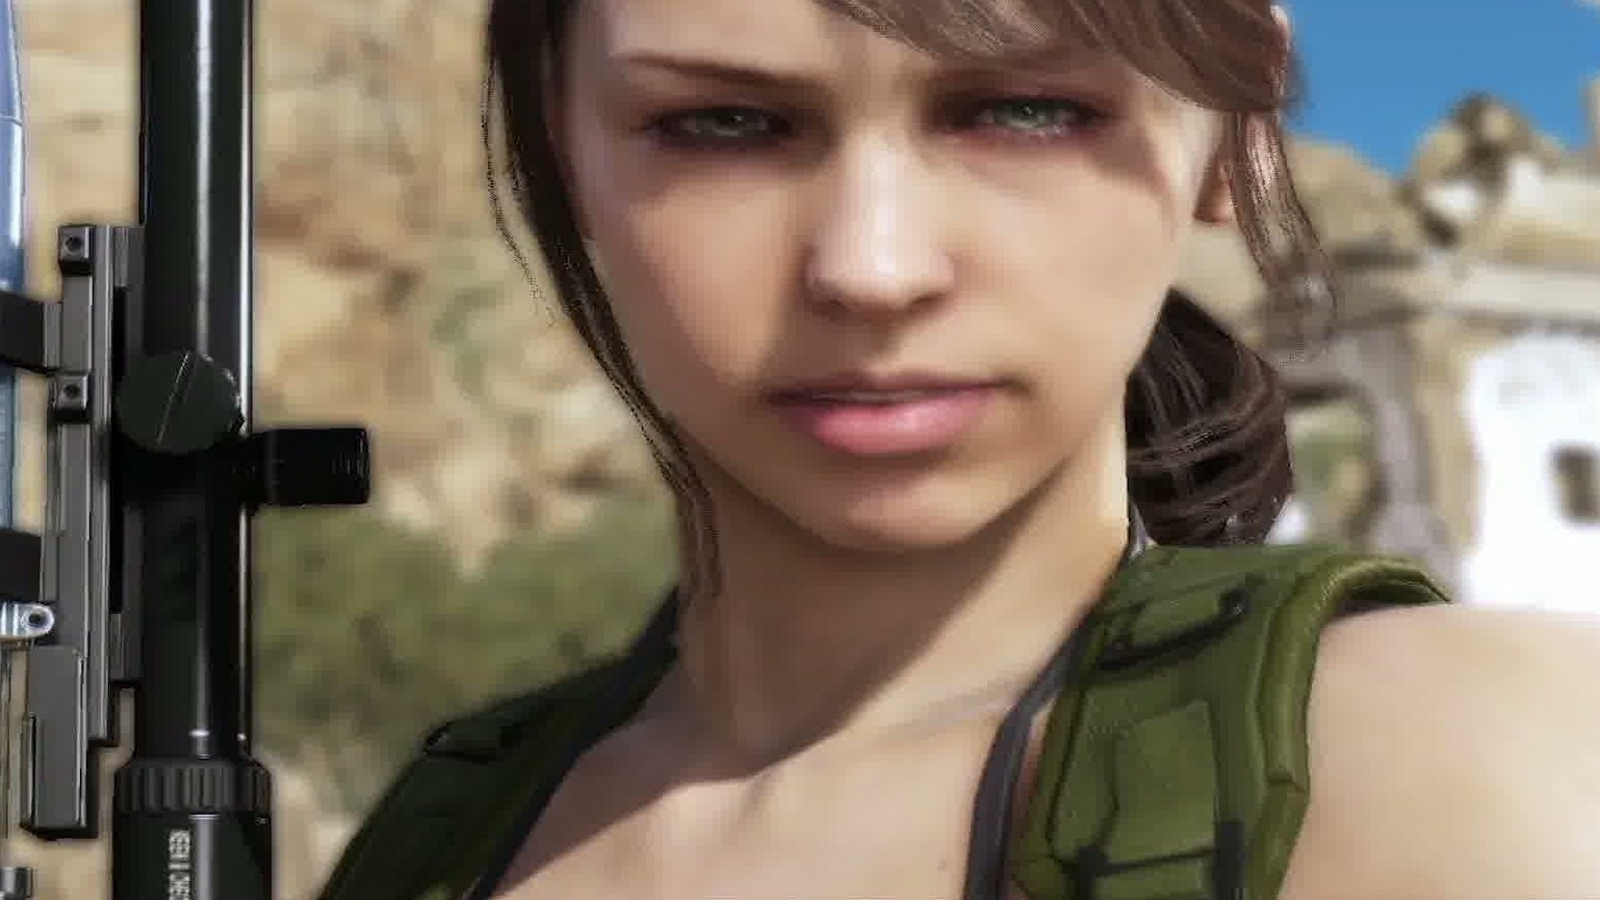 Metal Gear Solid 5: The Phantom Pain Snake and Quiet gameplay revealed